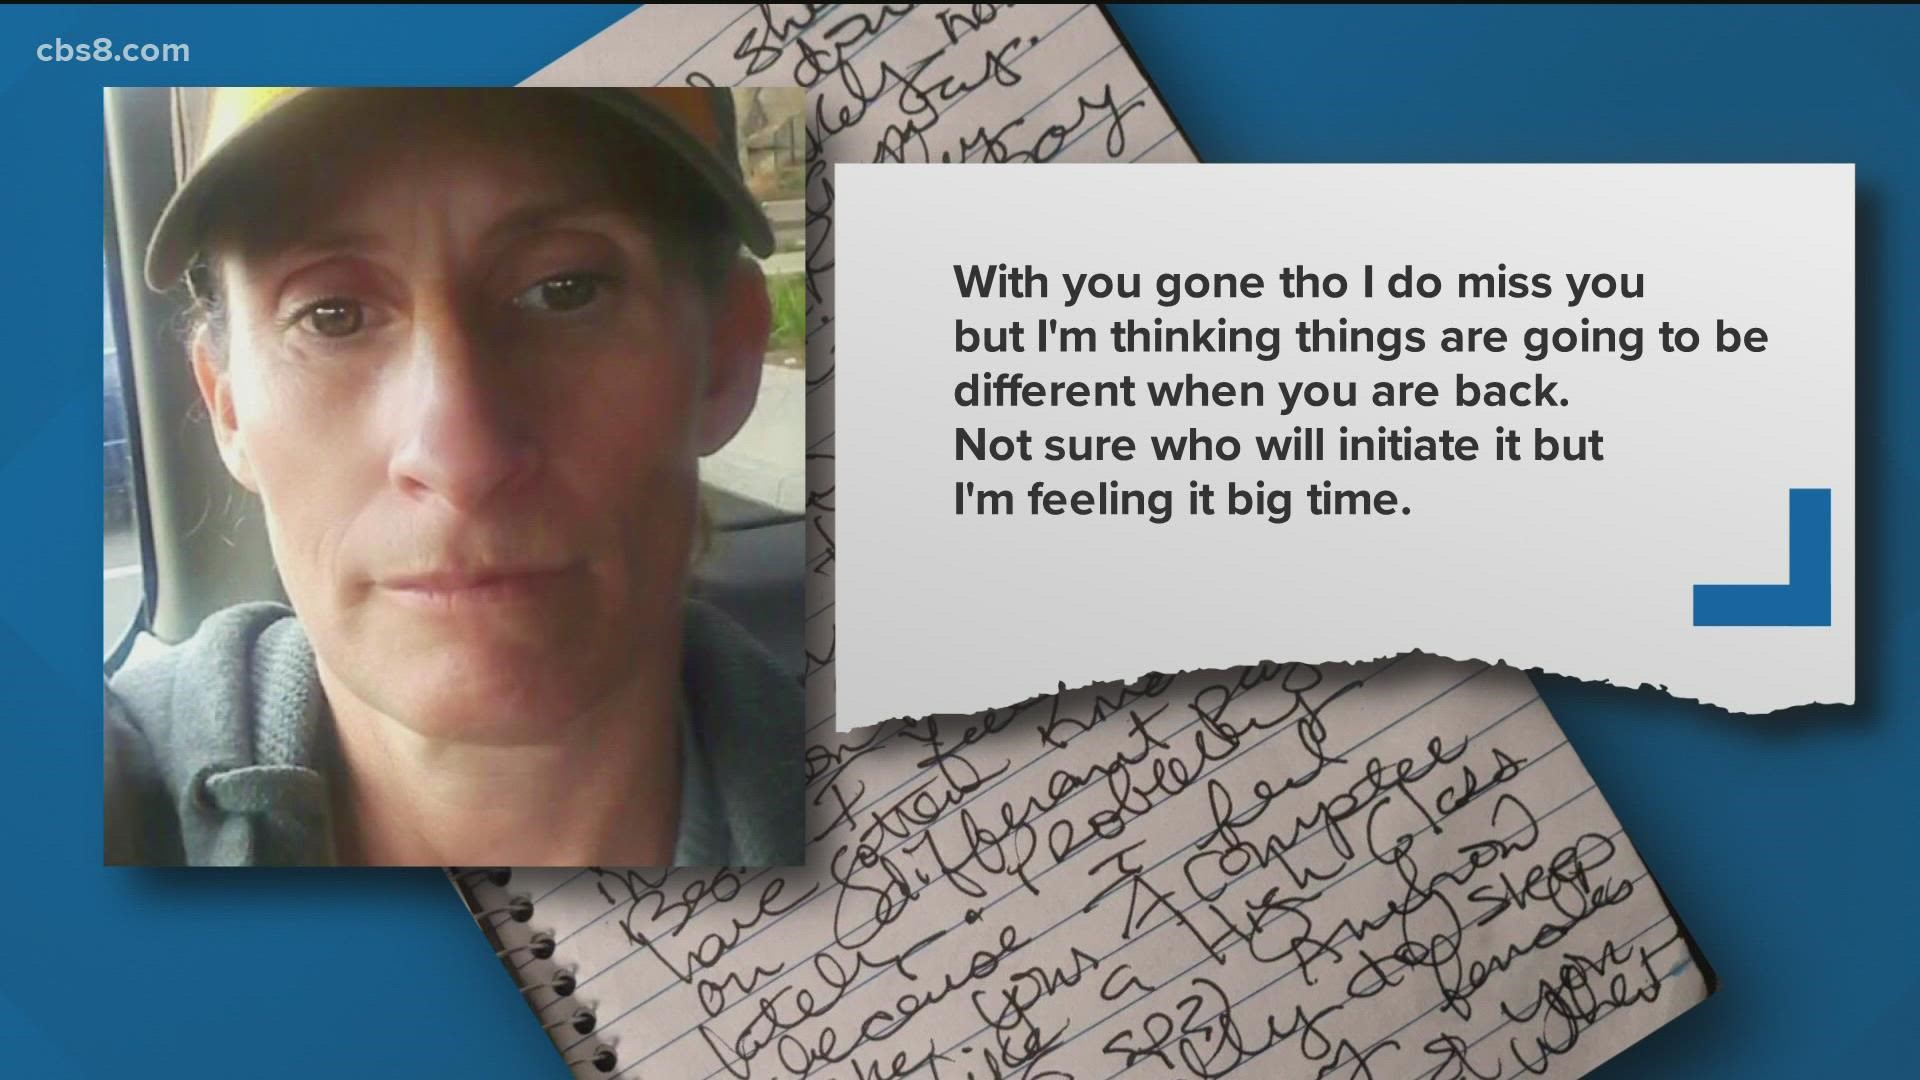 Family of victim found Jodi Newkirk's journal entry, recorded telephone call with Keith Harper.